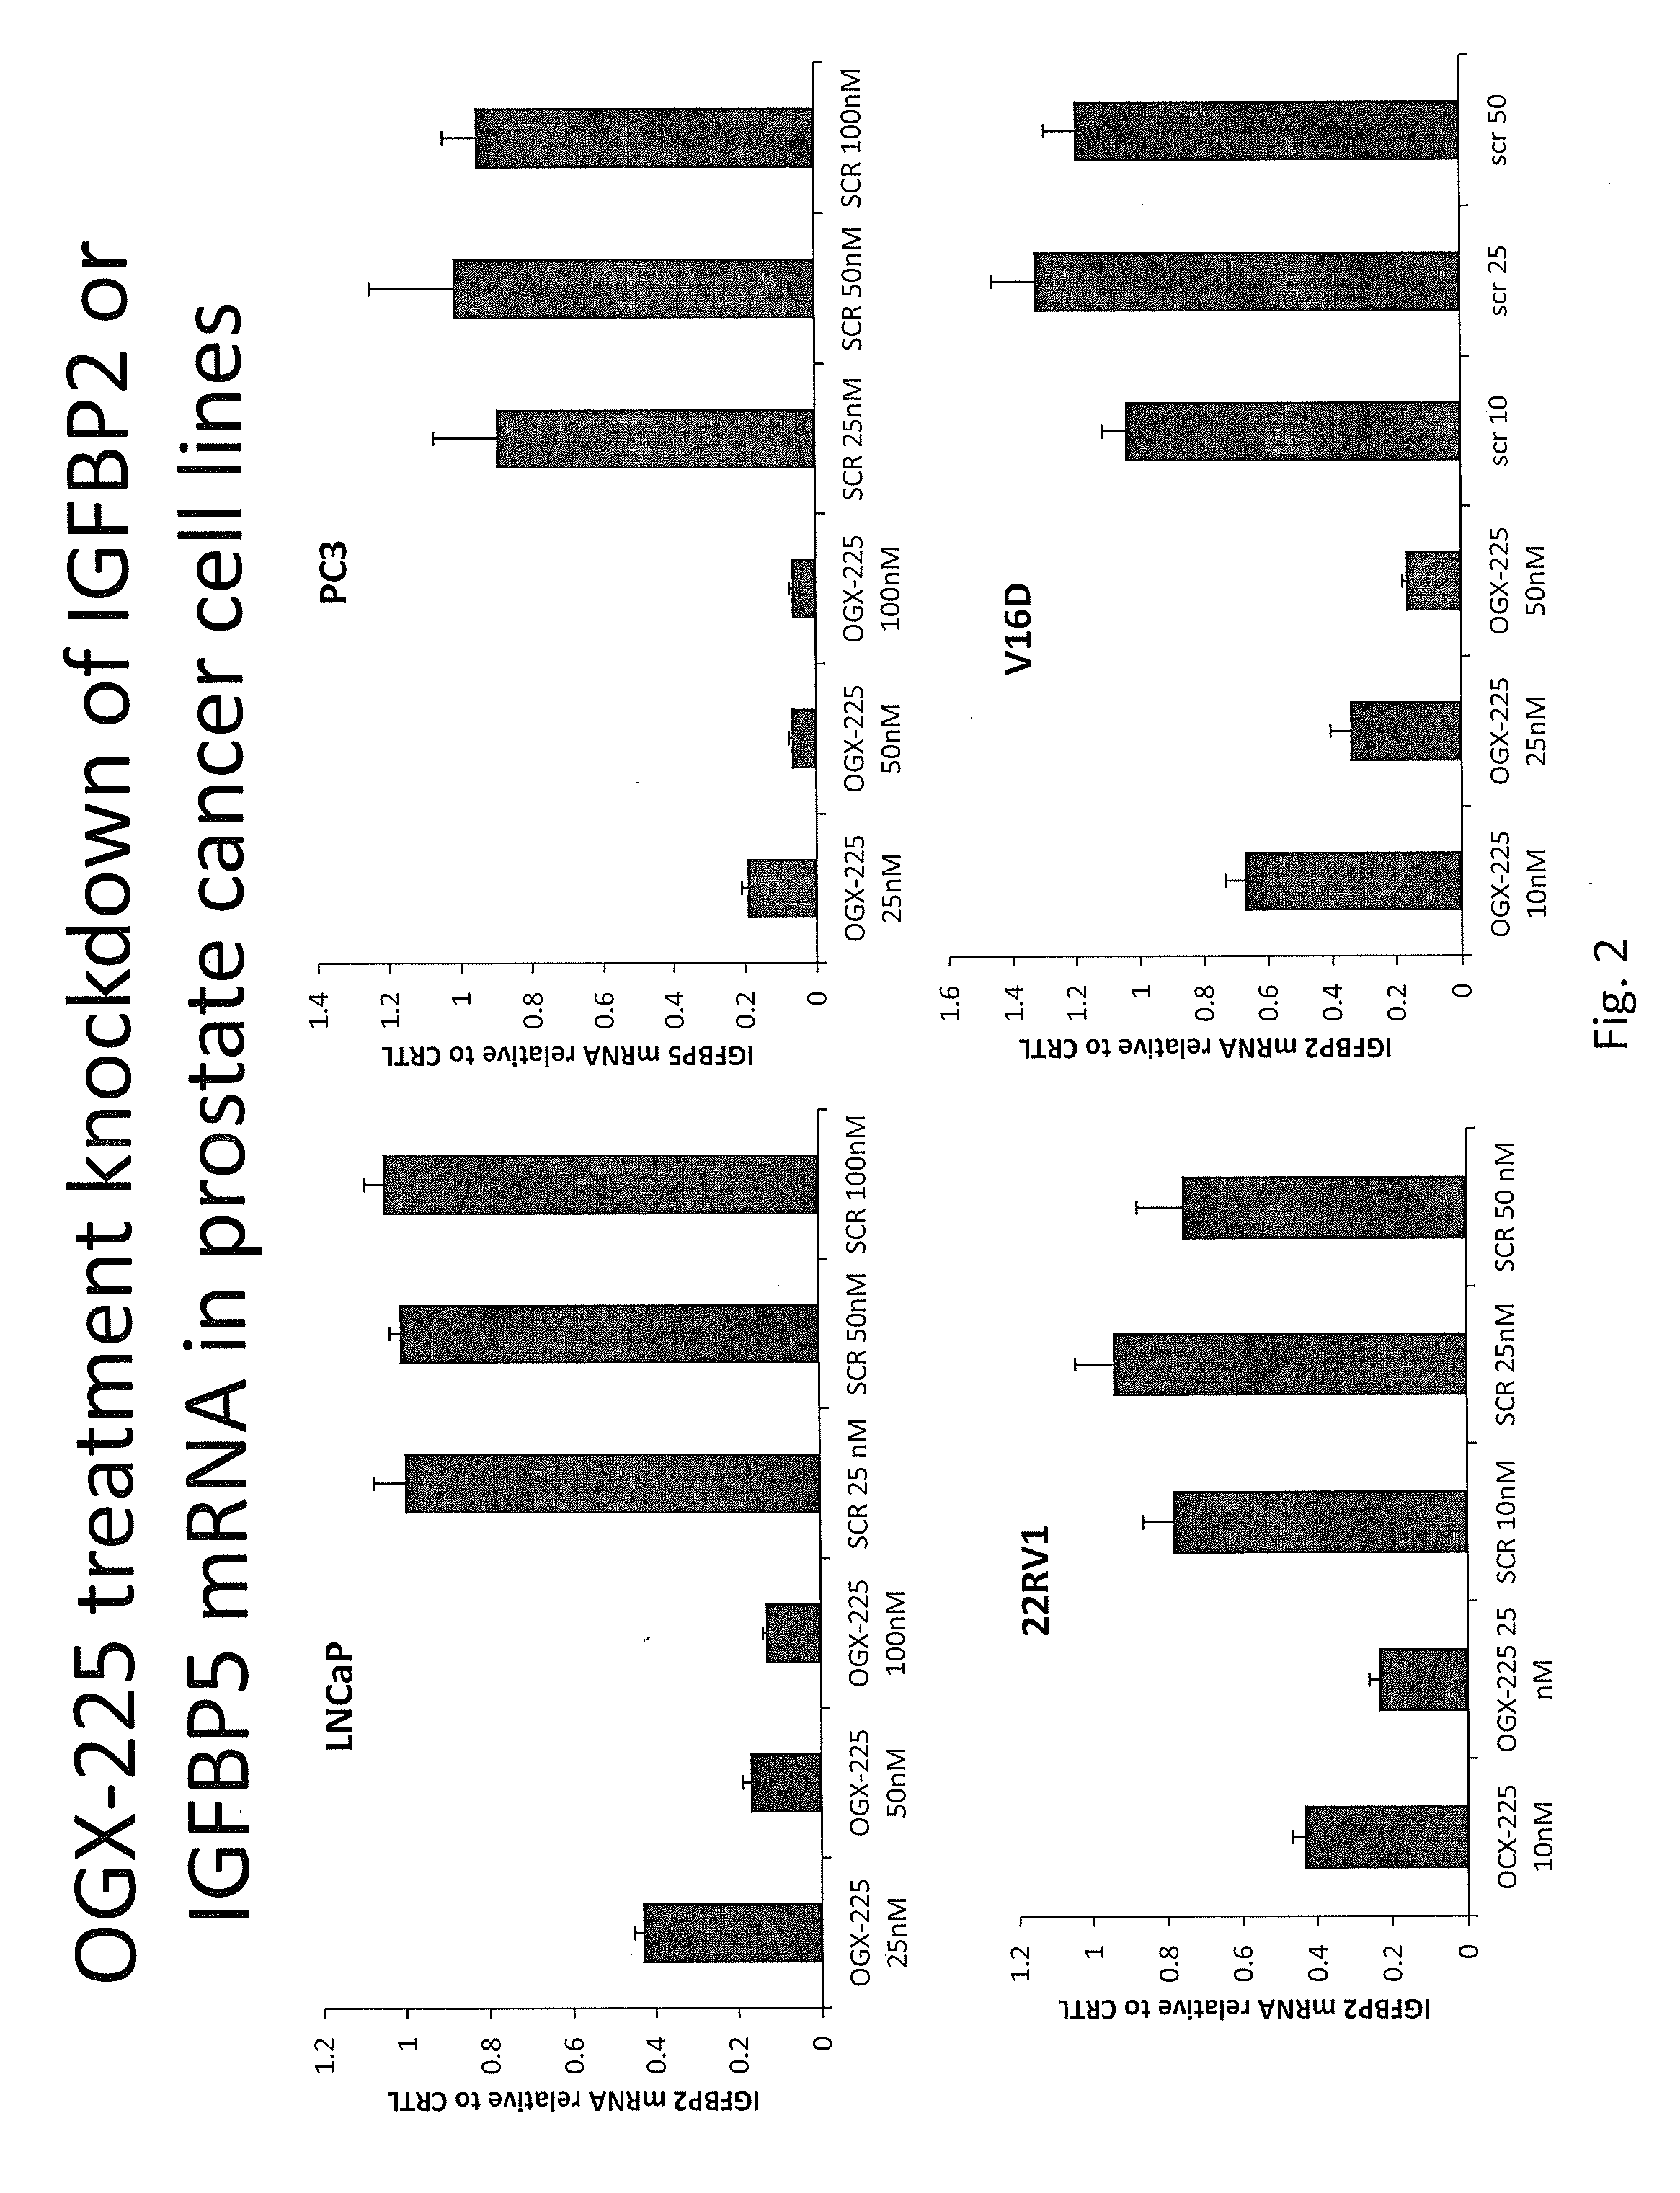 Method for Treatment of Castration-Resistant Prostate Cancer